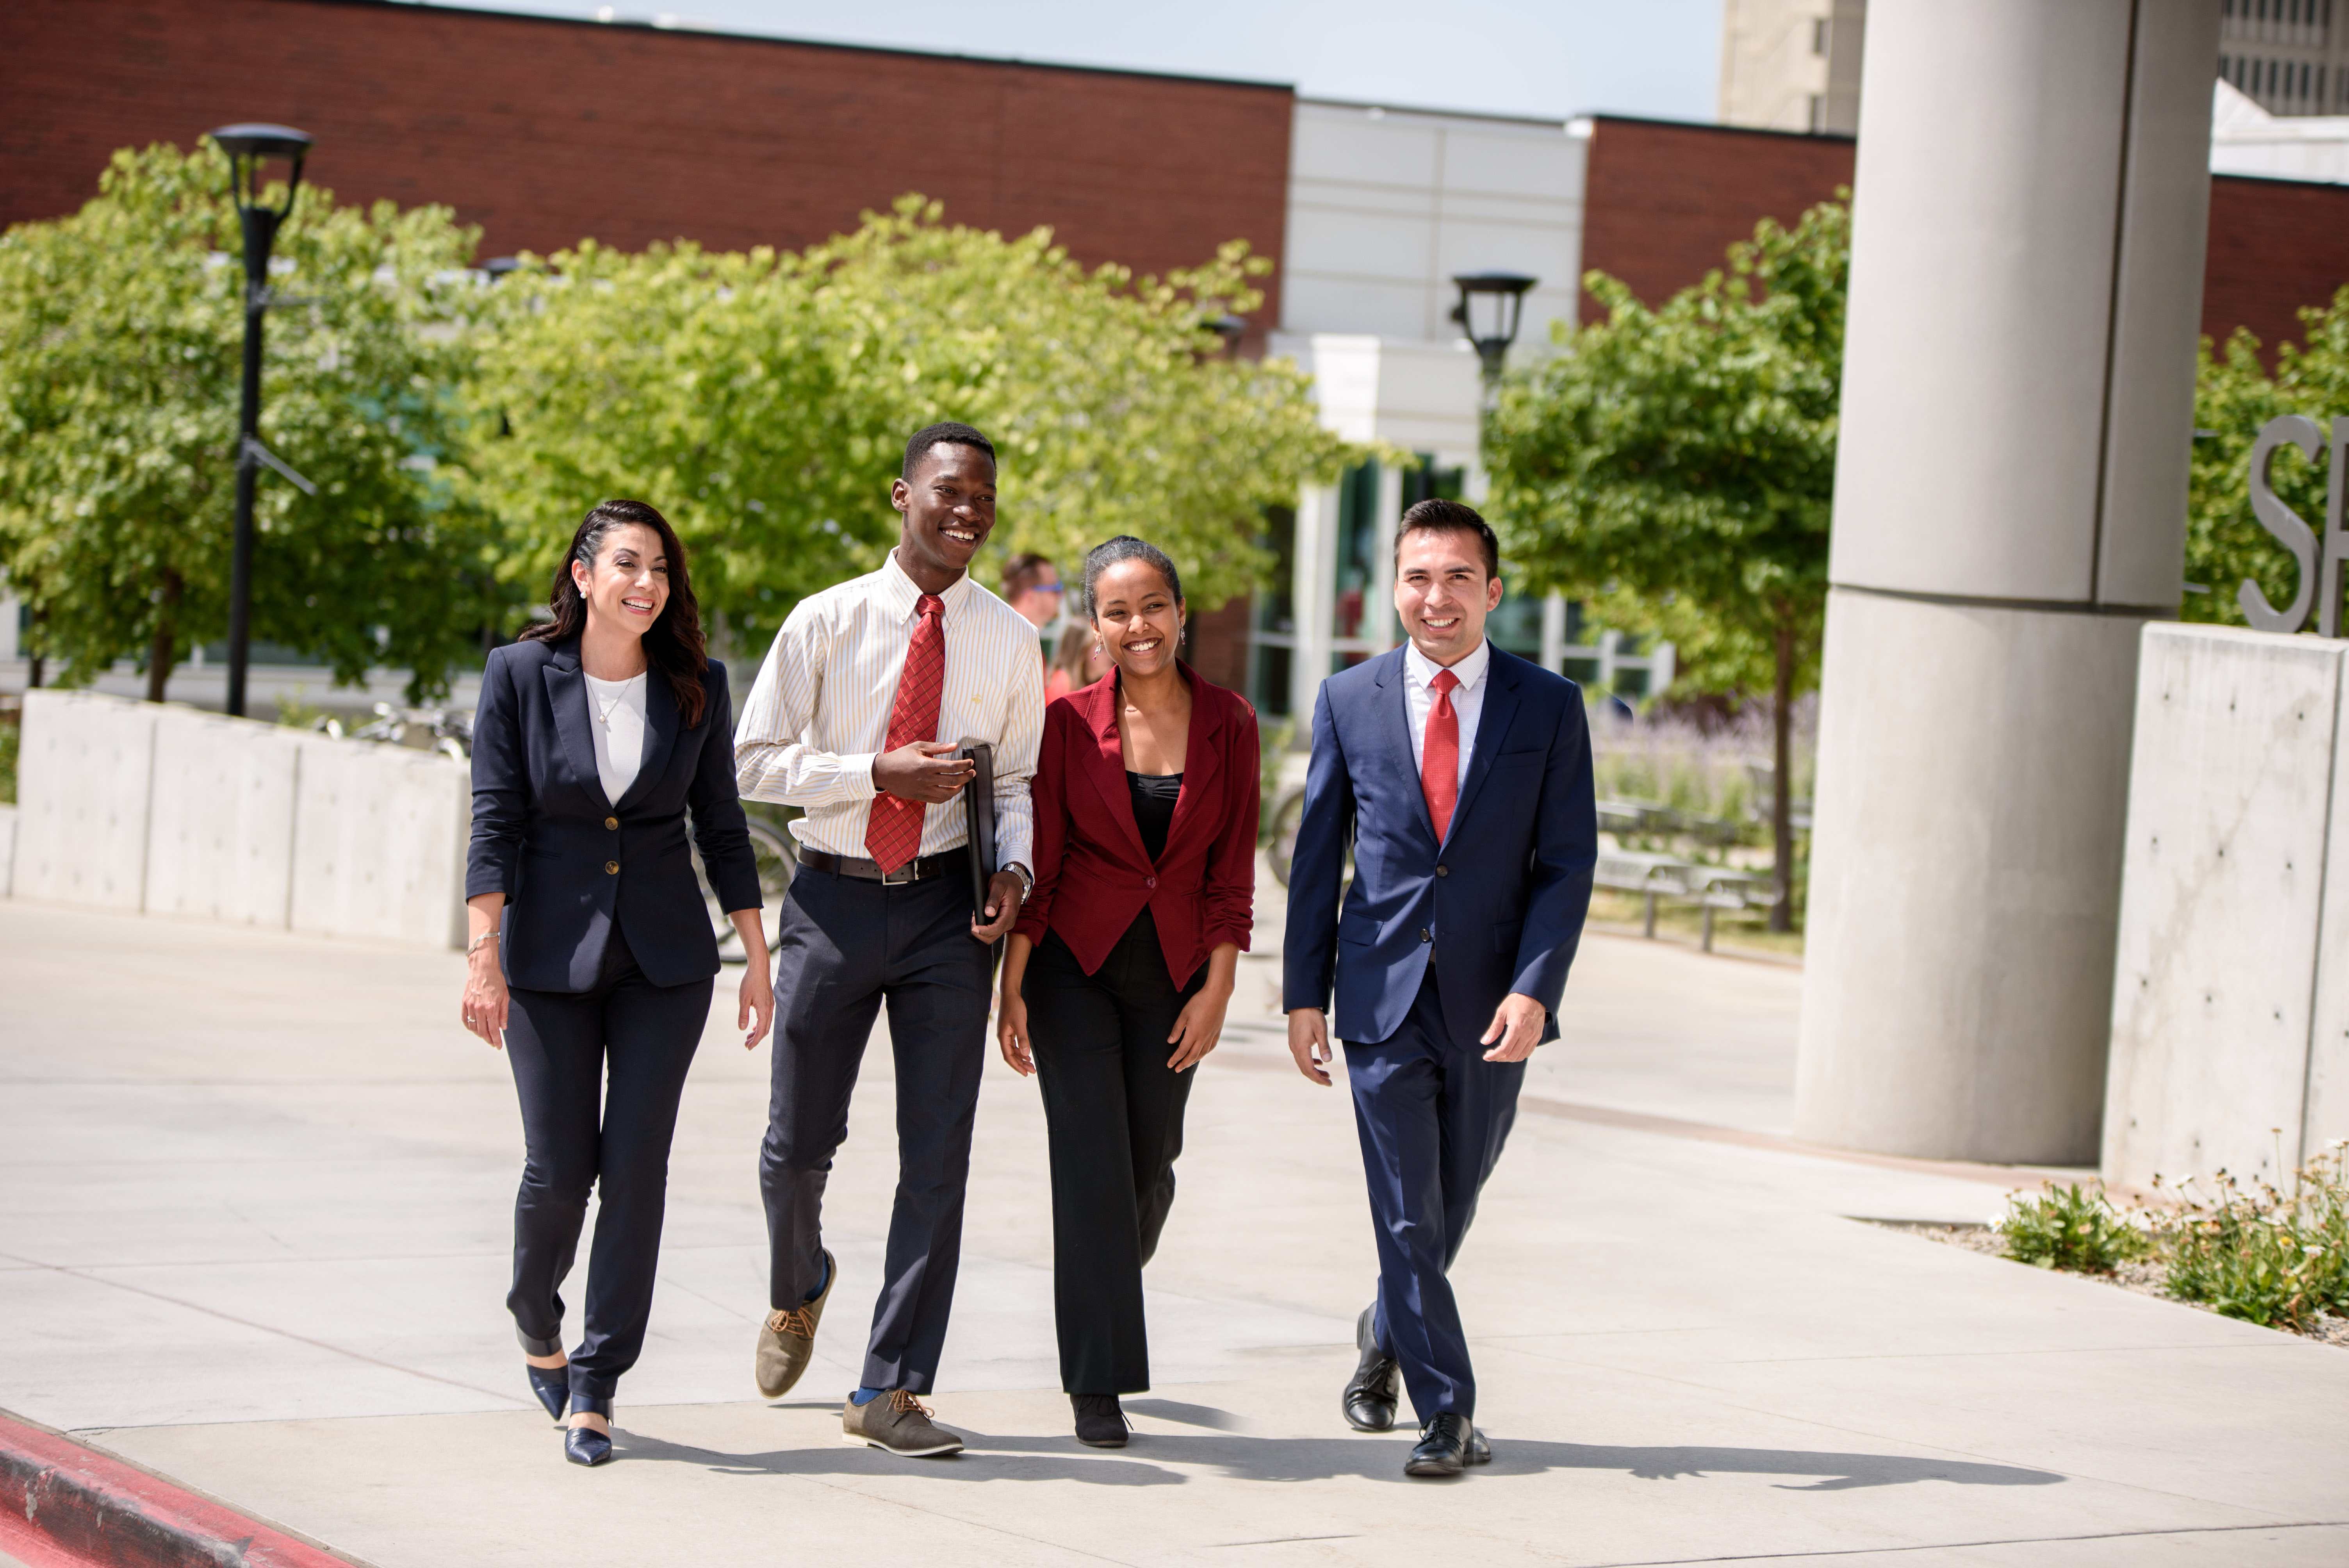 The David Eccles School of Business MBA Program jumps 13 spots into the top 50 in the latest U.S. News & World Report rankings.